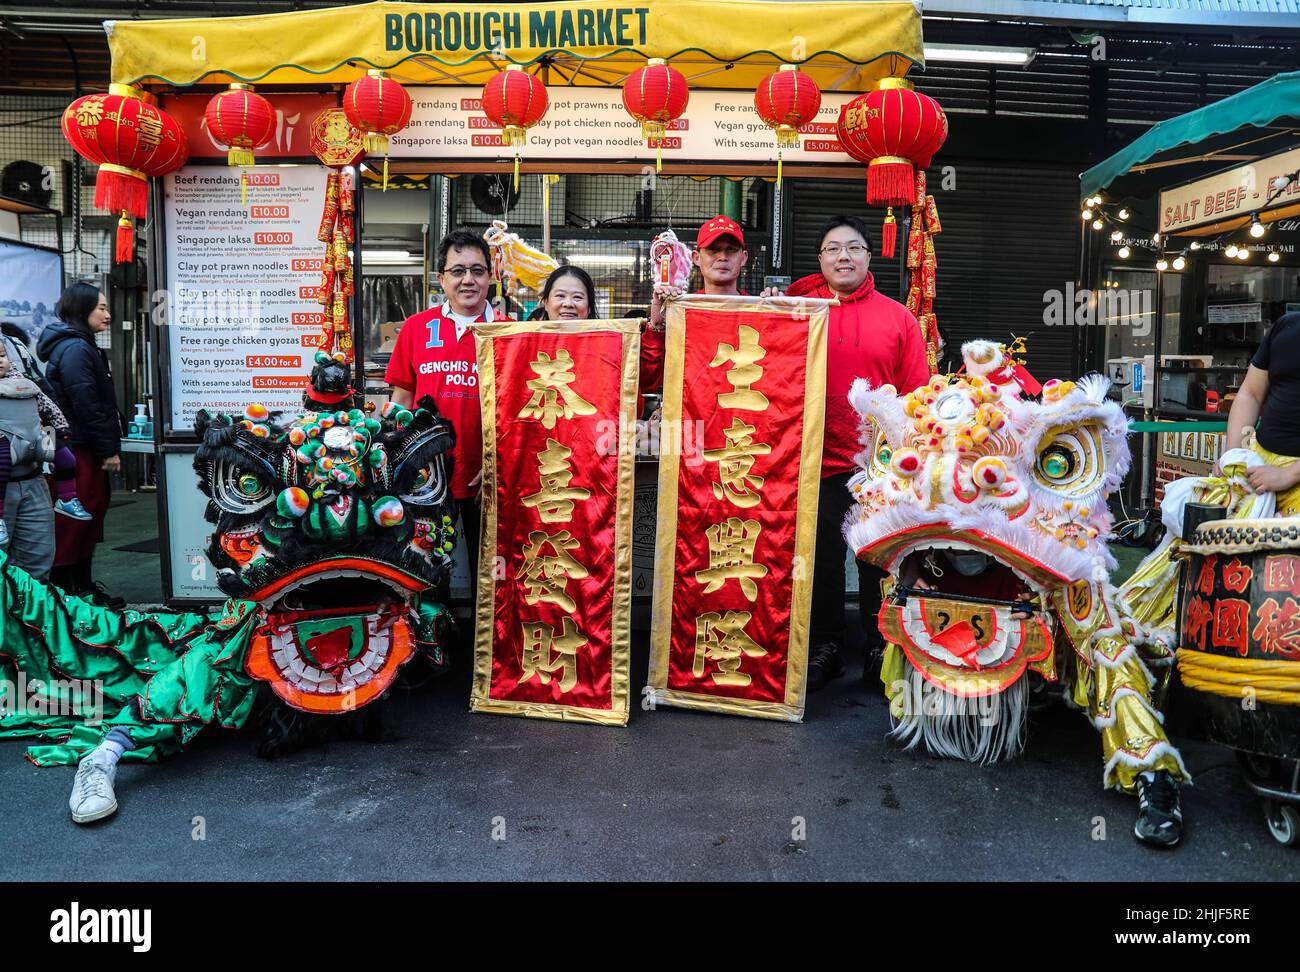 London UK 29 January 2022 A Traditional Dance to mark the star of a new year, Chinese new year of the Tiger  to mark Lunar New Year, chef Salina Khairunnisa, who runs the Joli stand in the Borough Market Kitchen, organized  a spectacular lion dance through the Market – a traditional harbinger of good luck in parts of east and southeast Asia. Joli, which specialises in Malaysian clay pot cooking, will also be offering a special New Year dish on its menu as part of the celebration: Prosperity clay pot noodles. Paul Quezada-Neiman/Alamy Live News Stock Photo